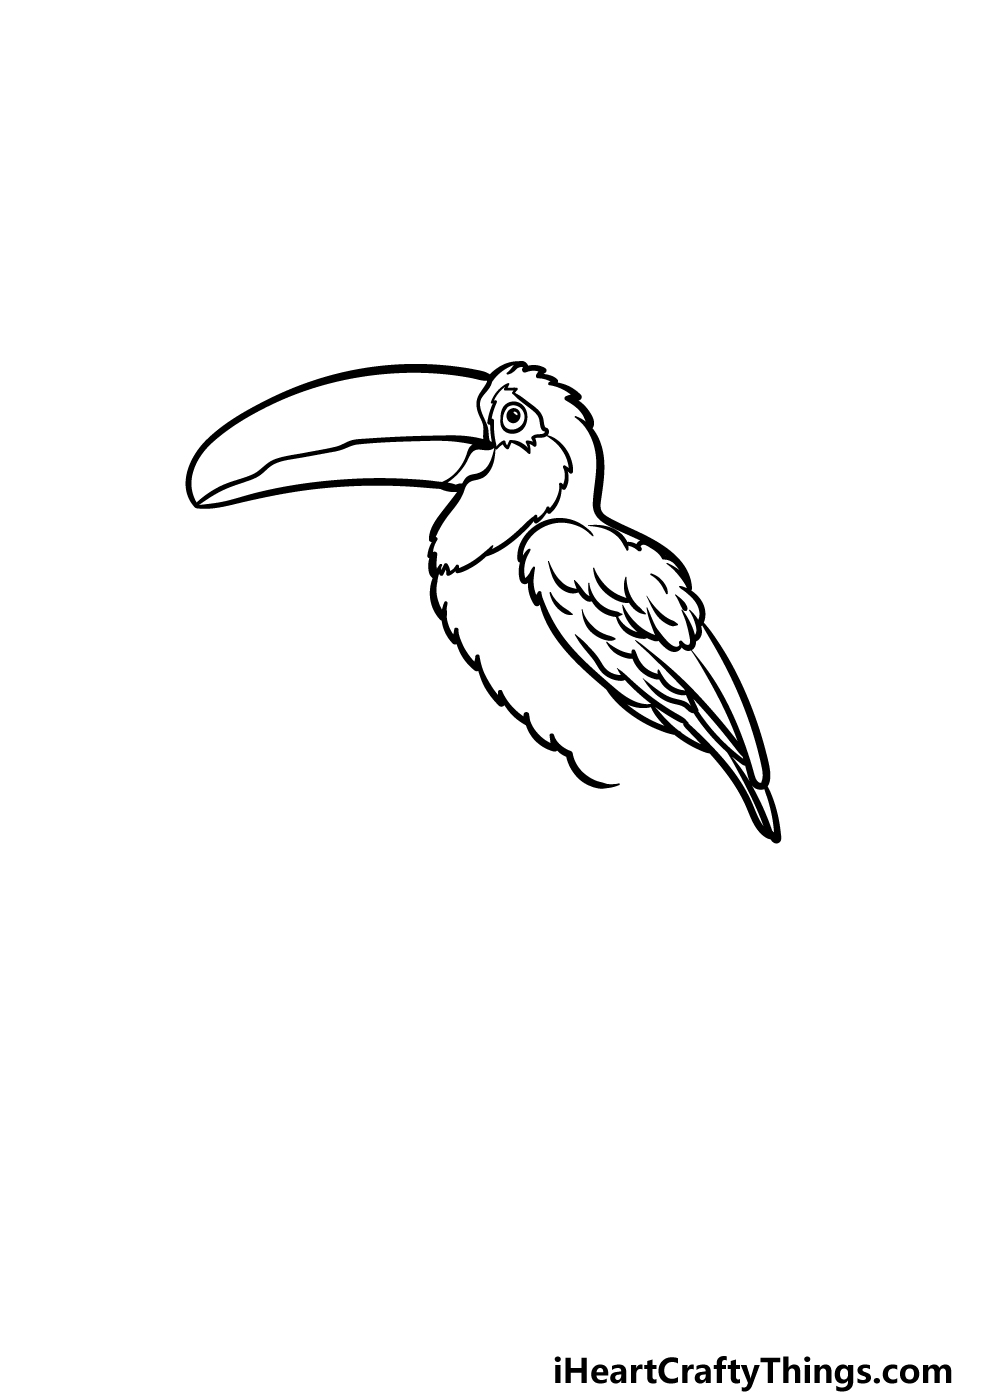 Toucan Drawing - How To Draw A Toucan Step By Step